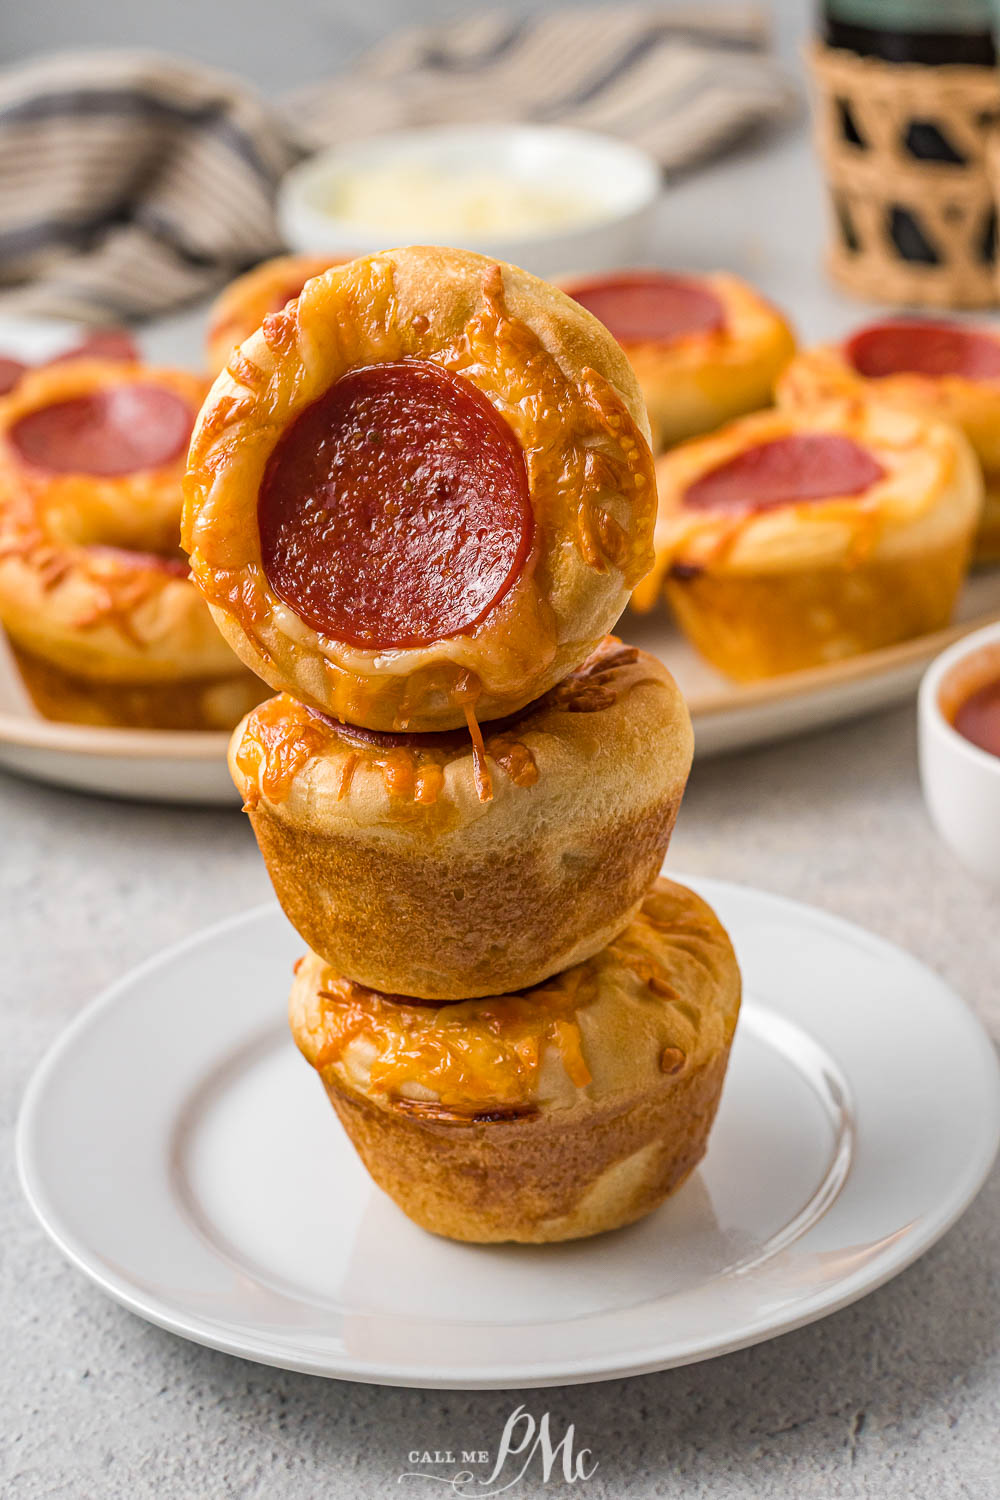 A stack of pizza bites on a plate.